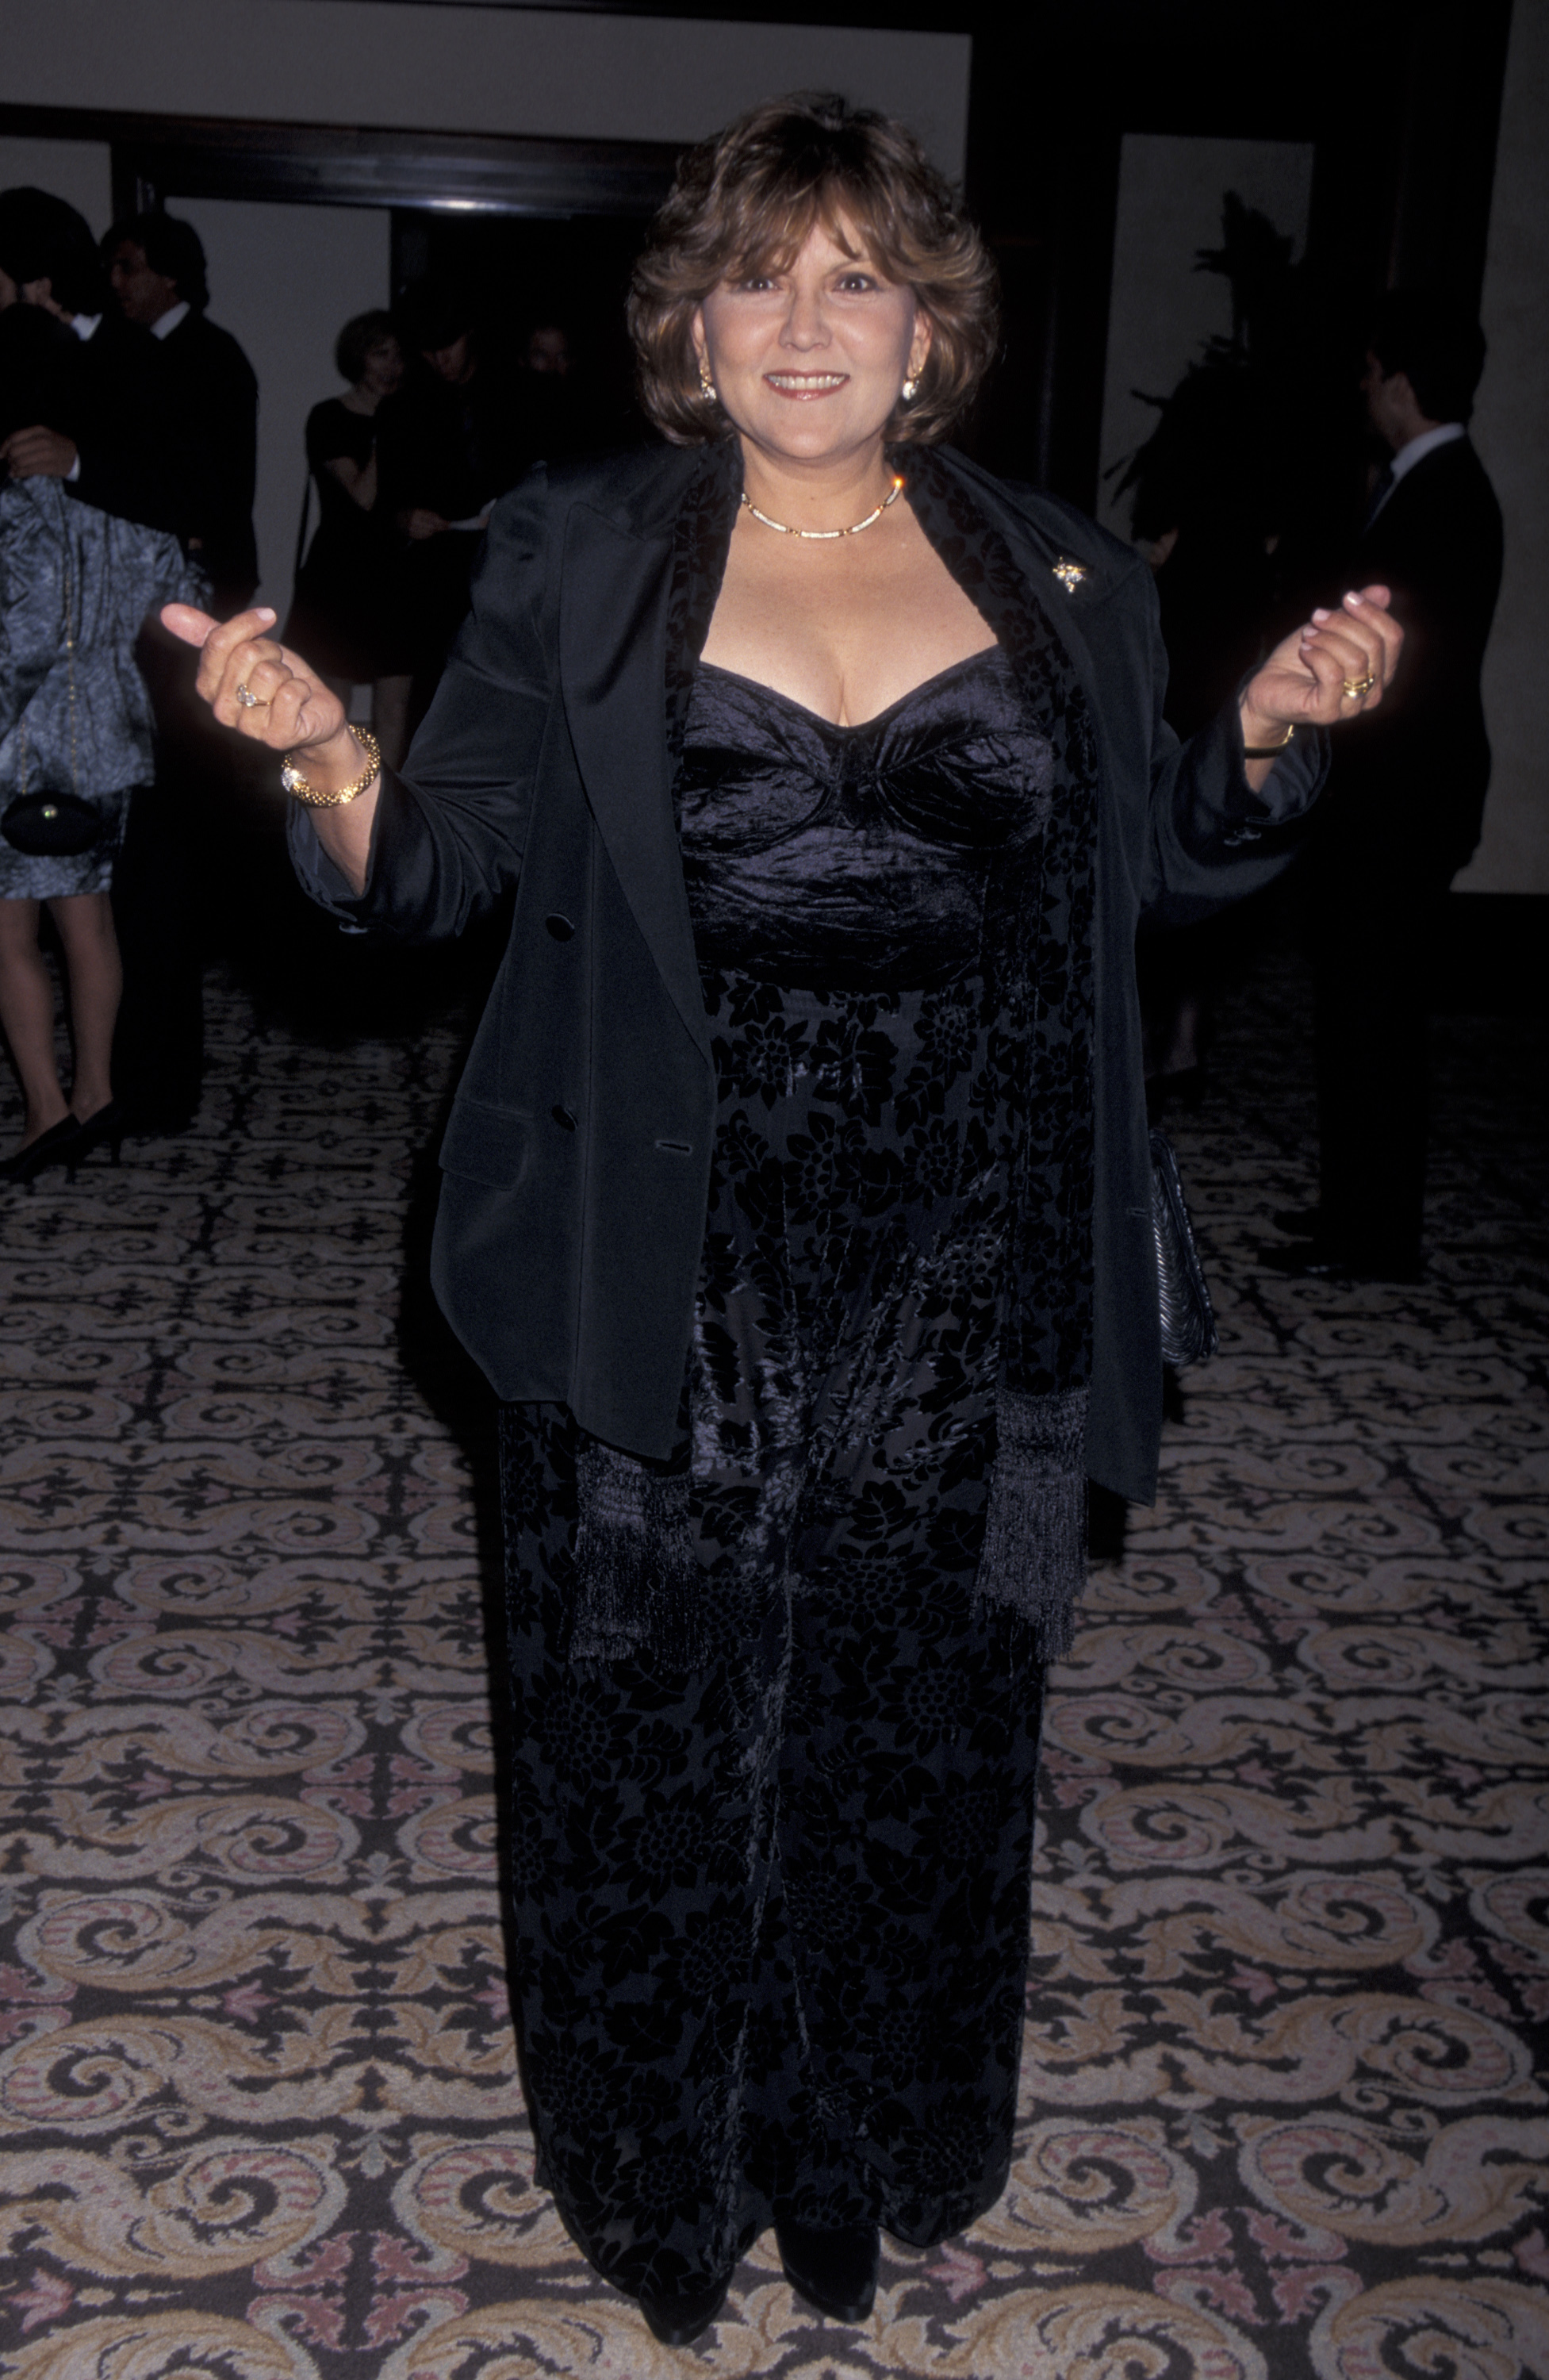 Brenda Vaccaro at the Fourth Annual "Race to Erase Multiple Sclerosis" event on June 1, 1996, in Century City, California. | Source: Getty Images